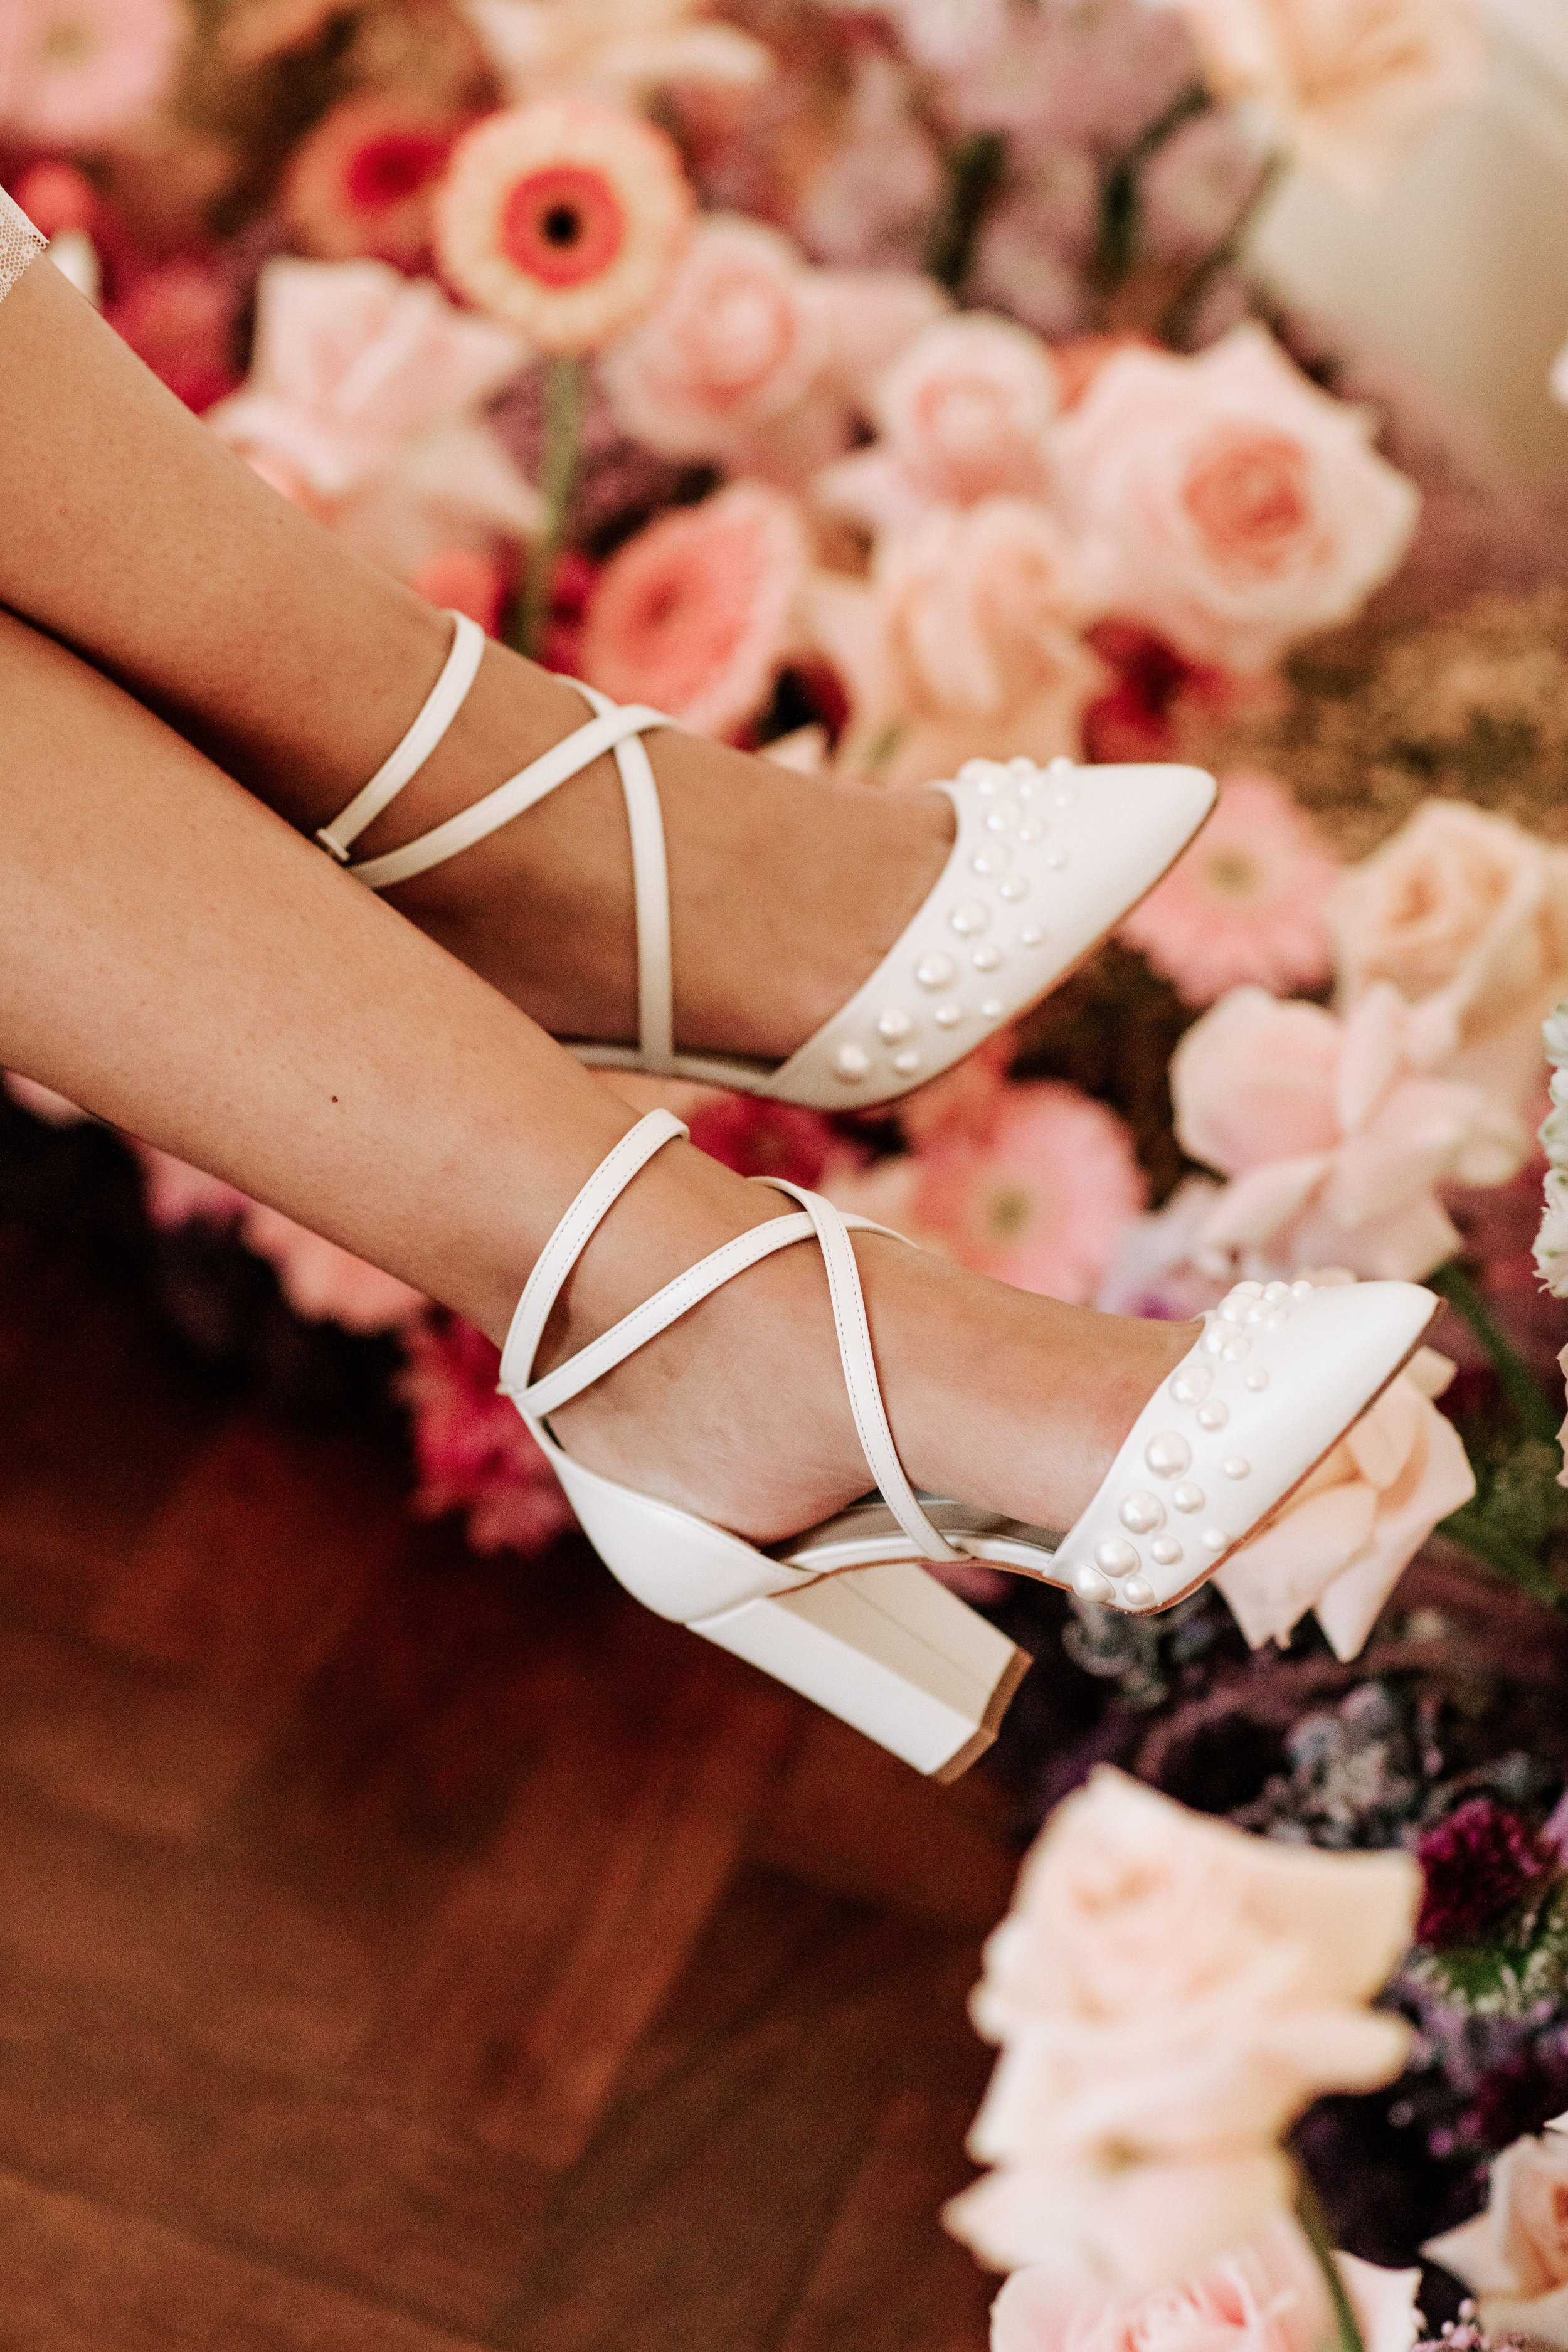 Pointed Pearl Wedding Shoes with Delicate Ankle Straps by Charlotte Mills.jpg